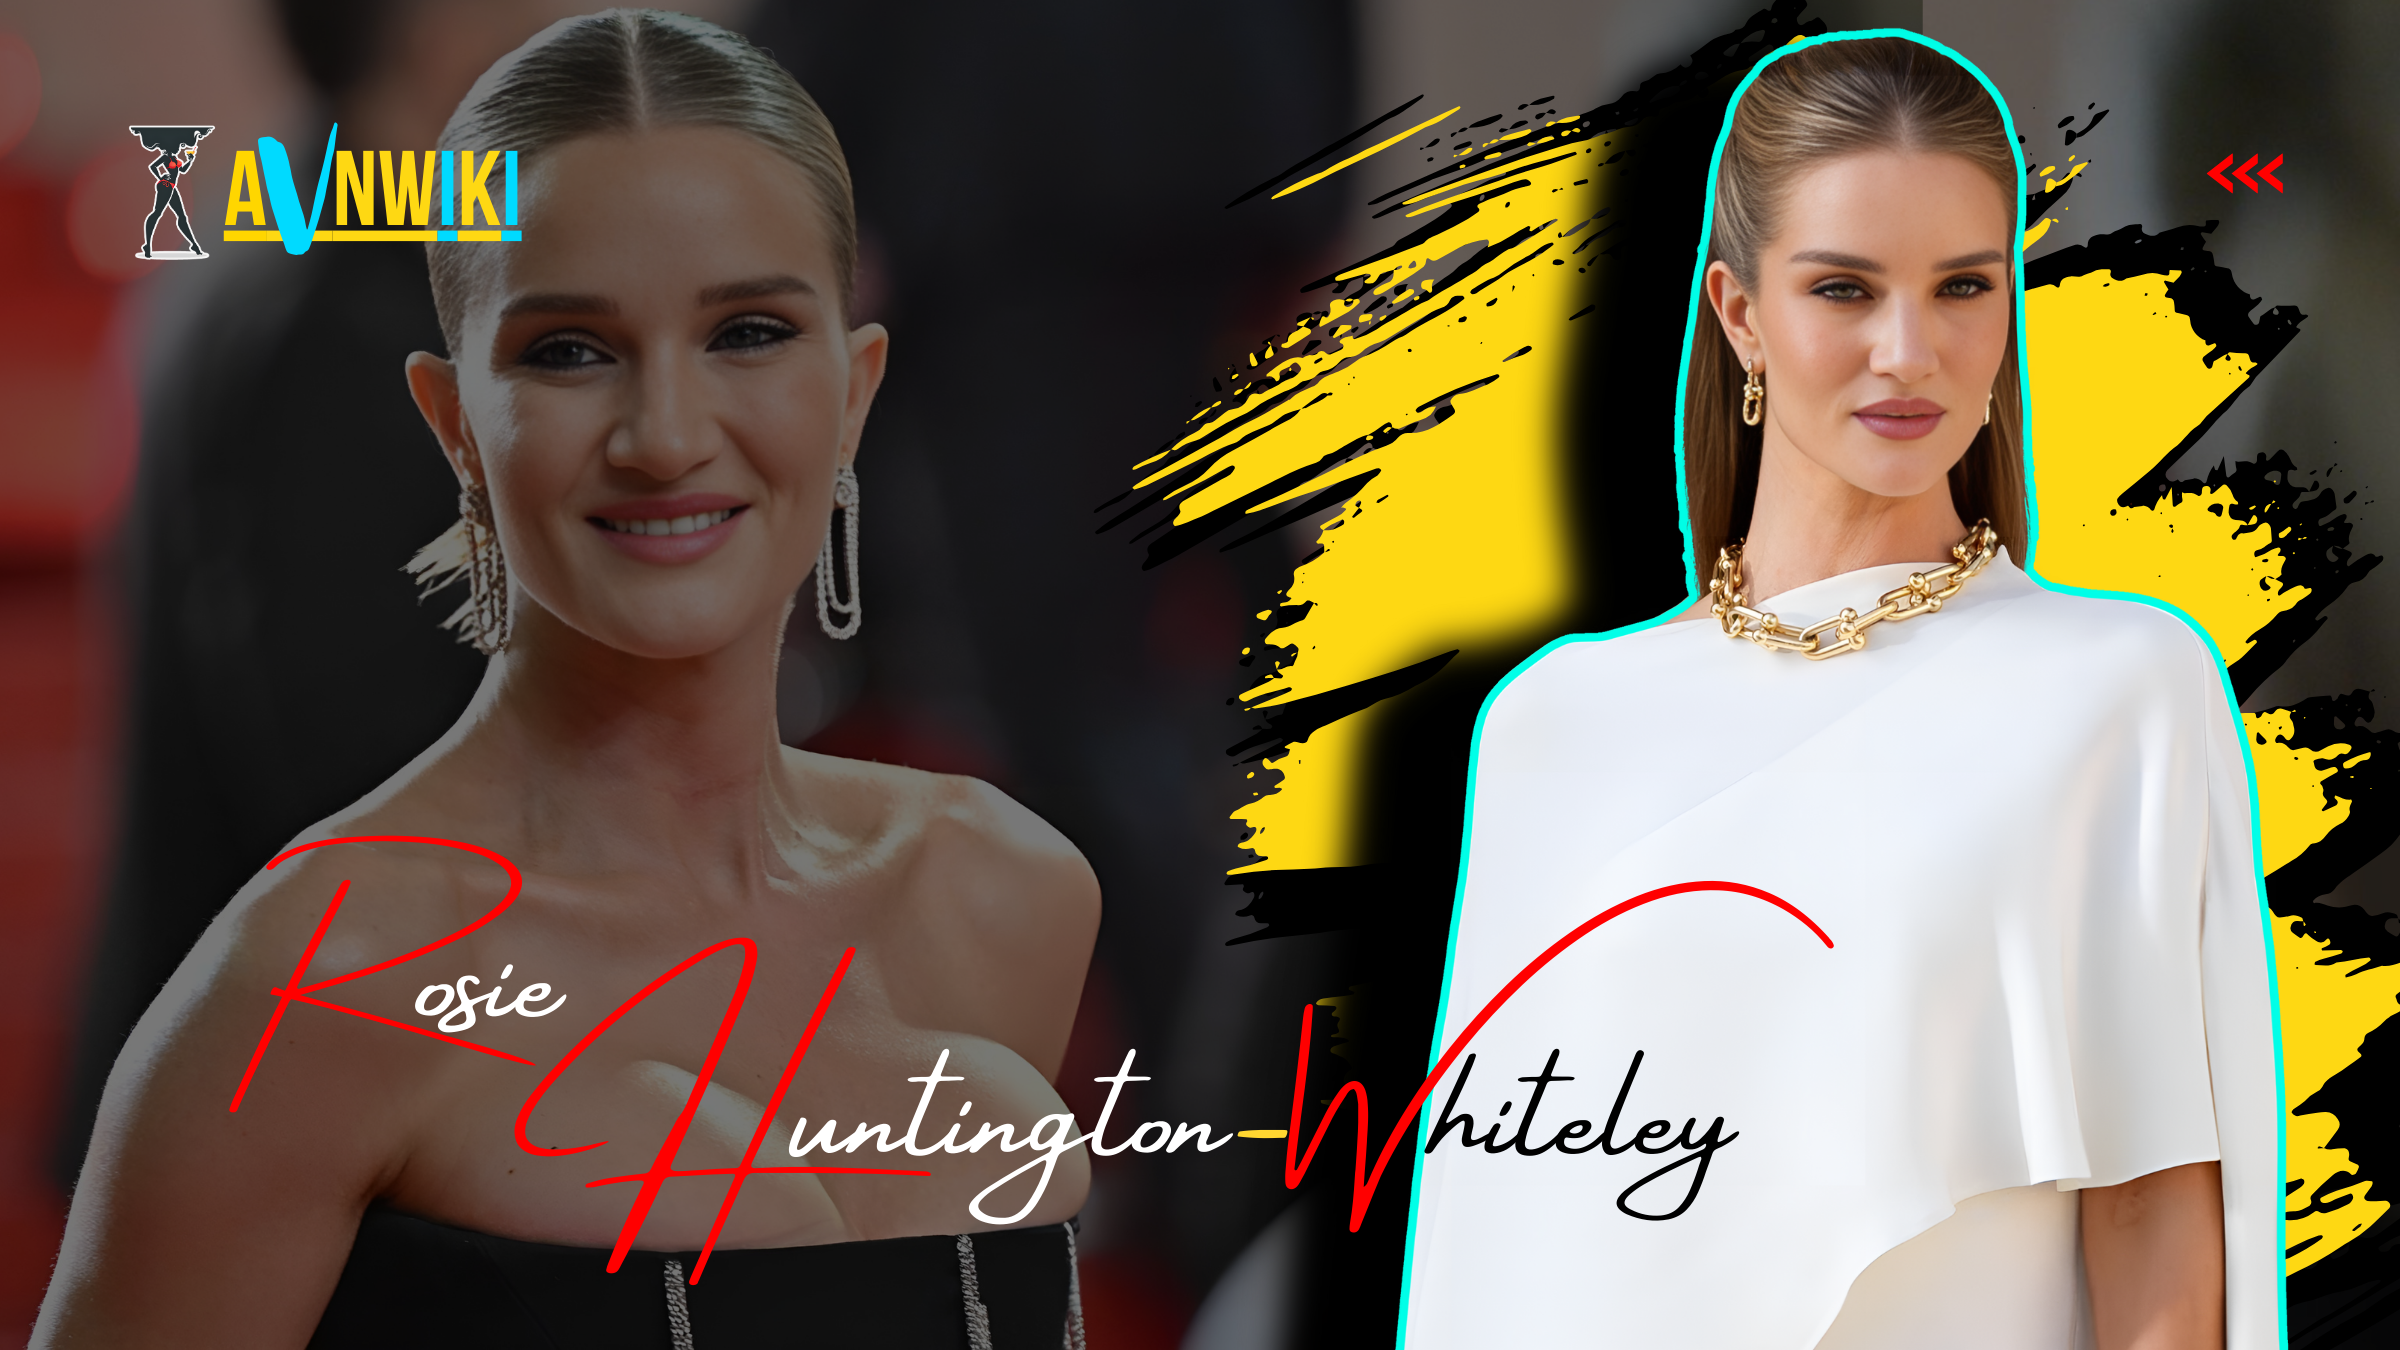 Rosie Huntington-Whiteley Biography, Wiki, Age, Height, Marriage, Movies